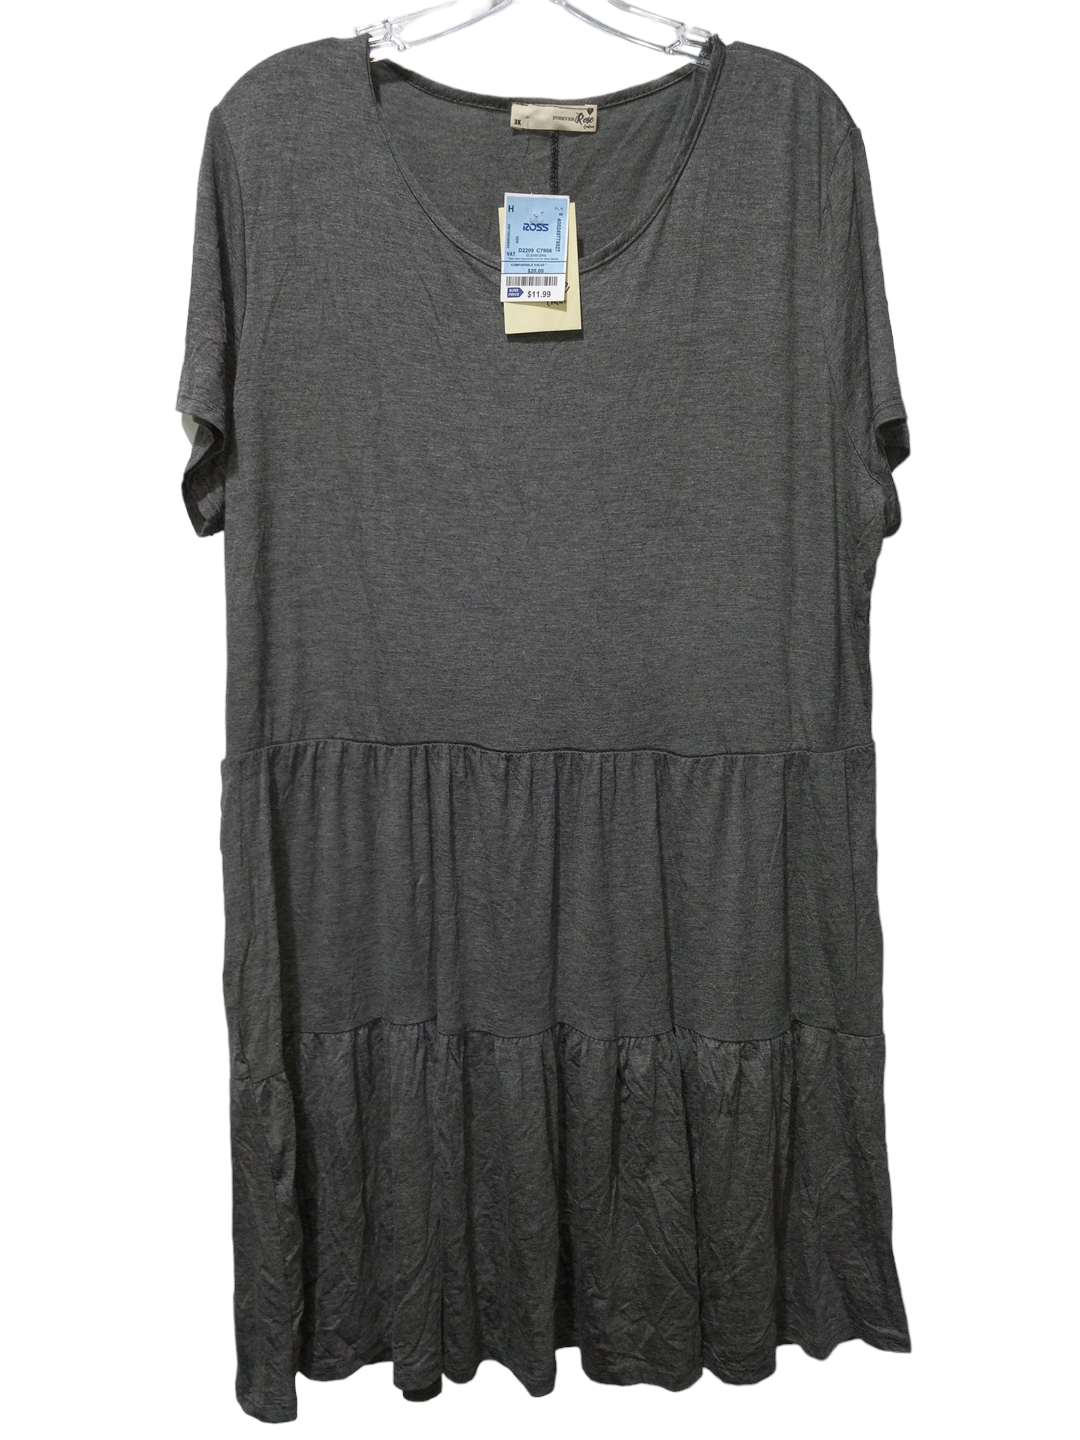 Grey Dress Casual Short Forever, Size 3x